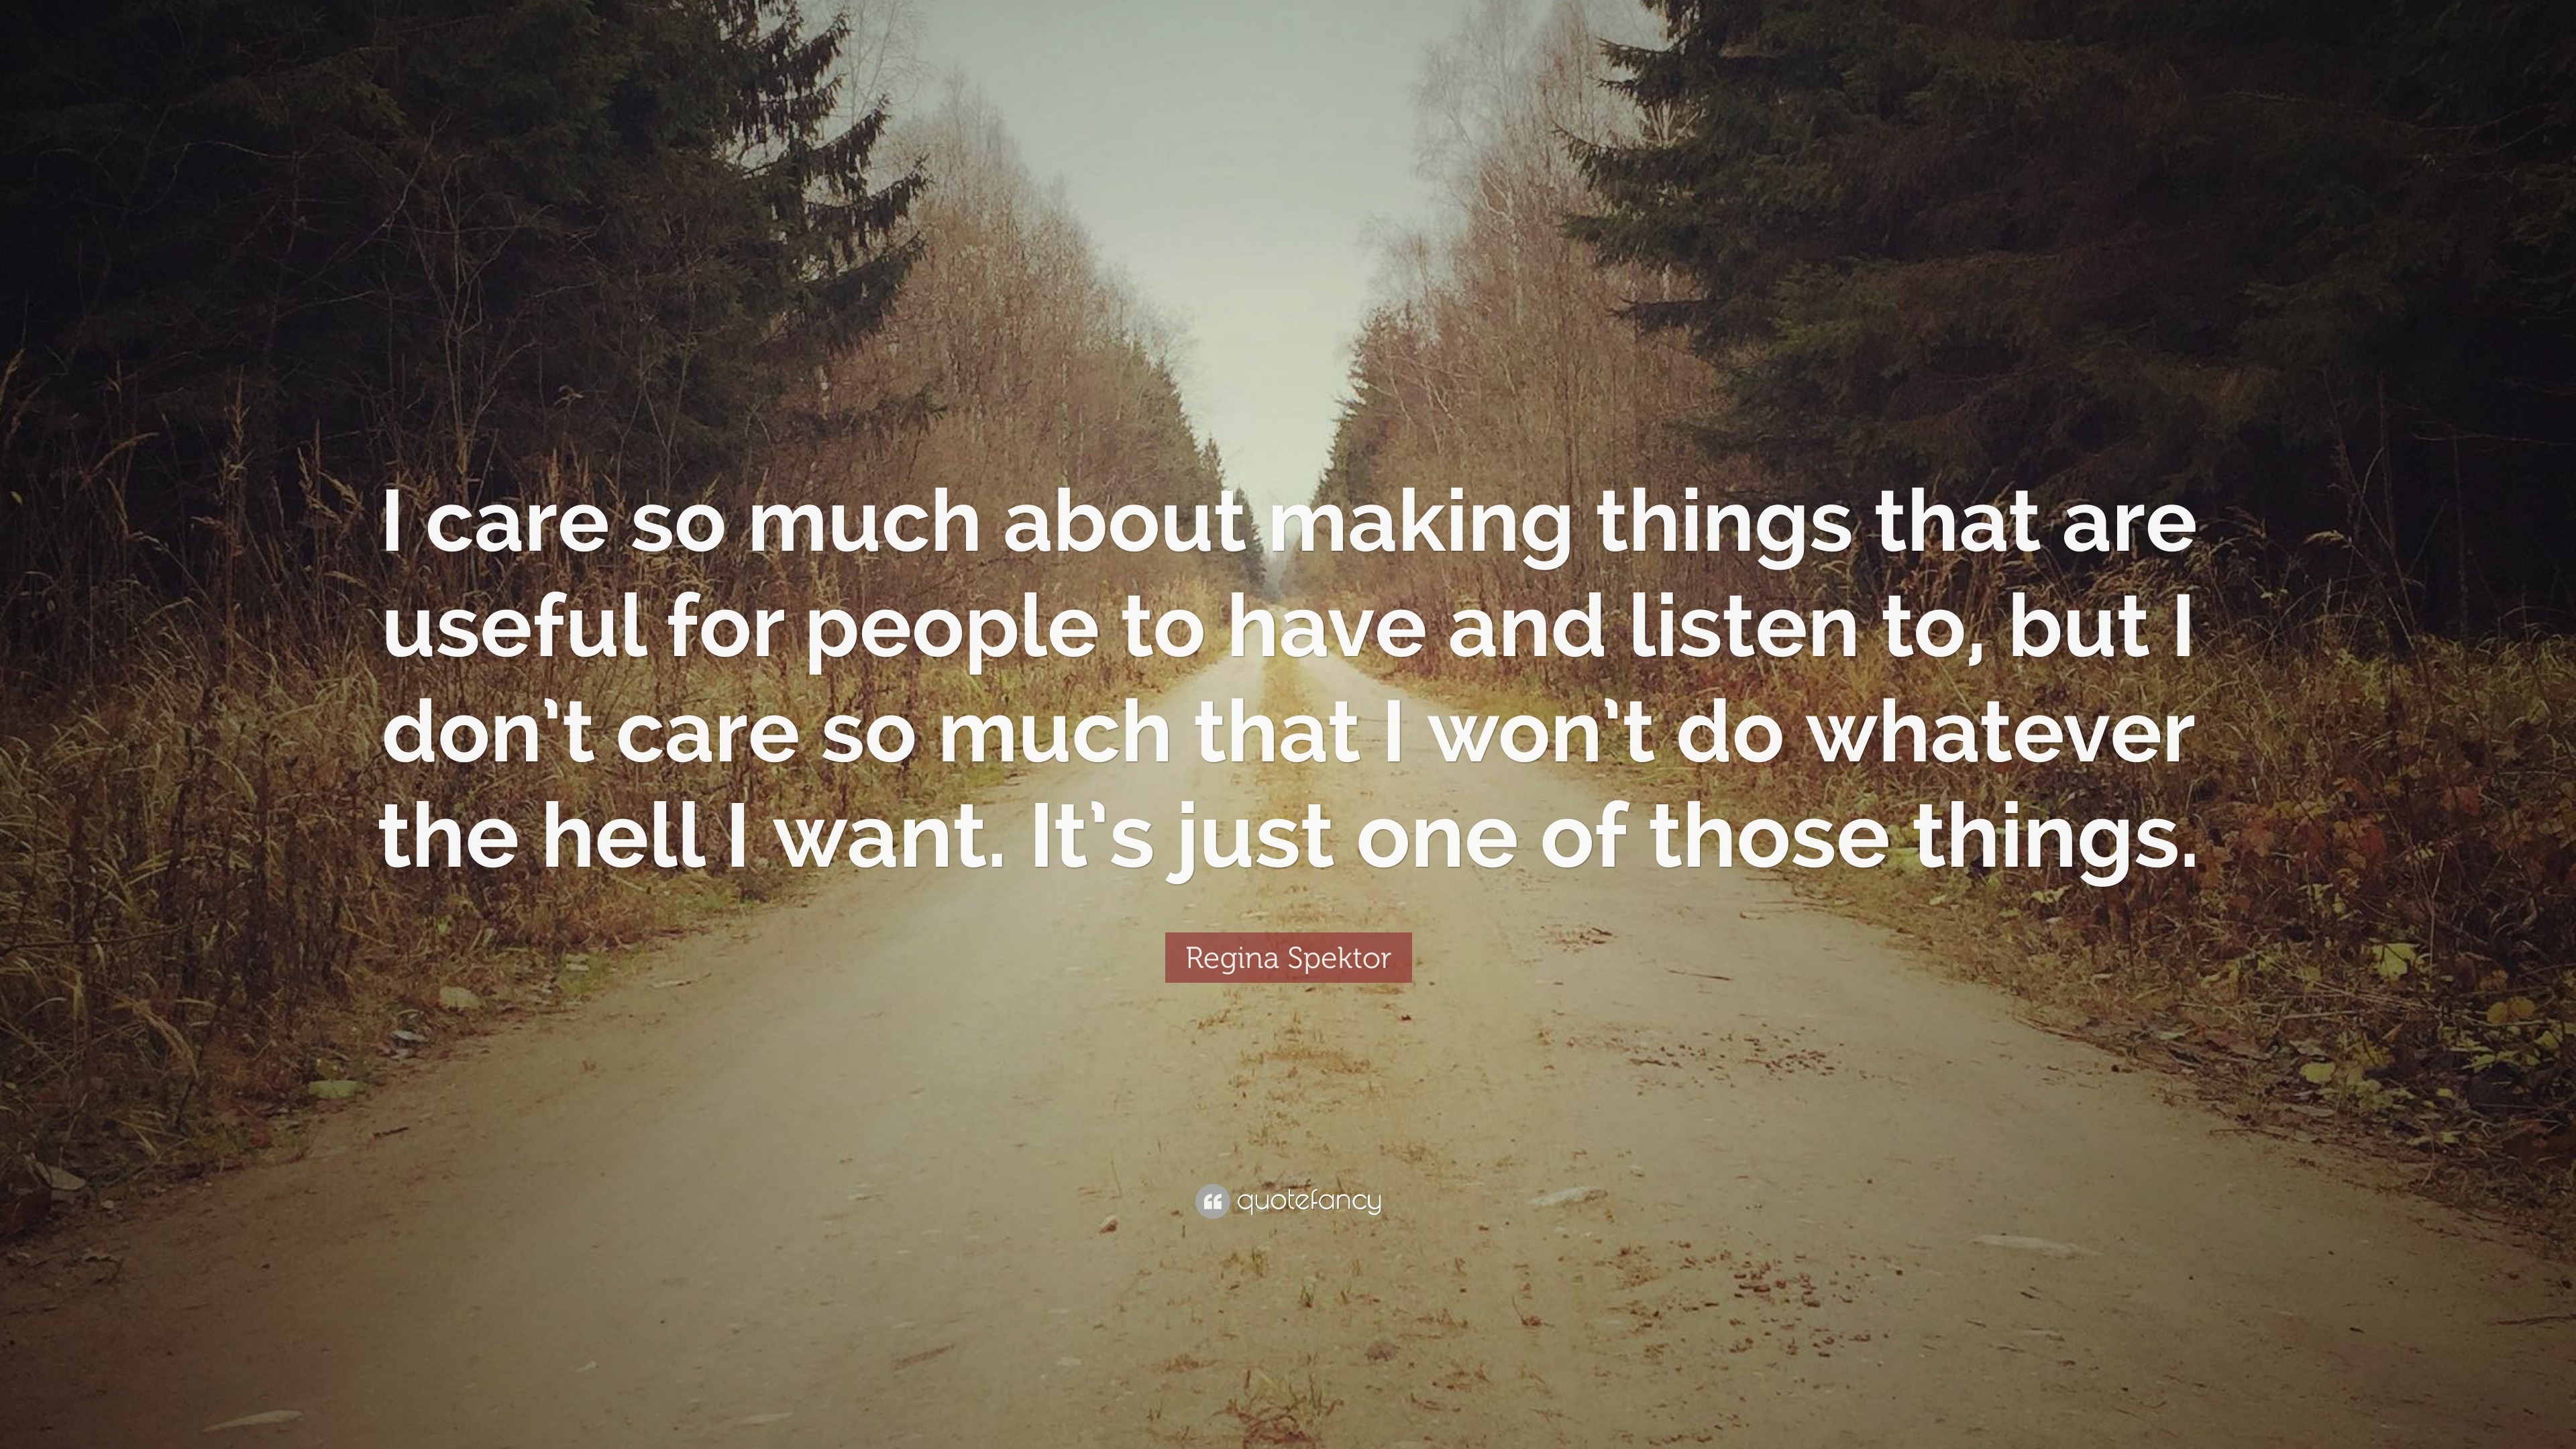 Regina Spektor Quote: “I care so much about making things that are ...